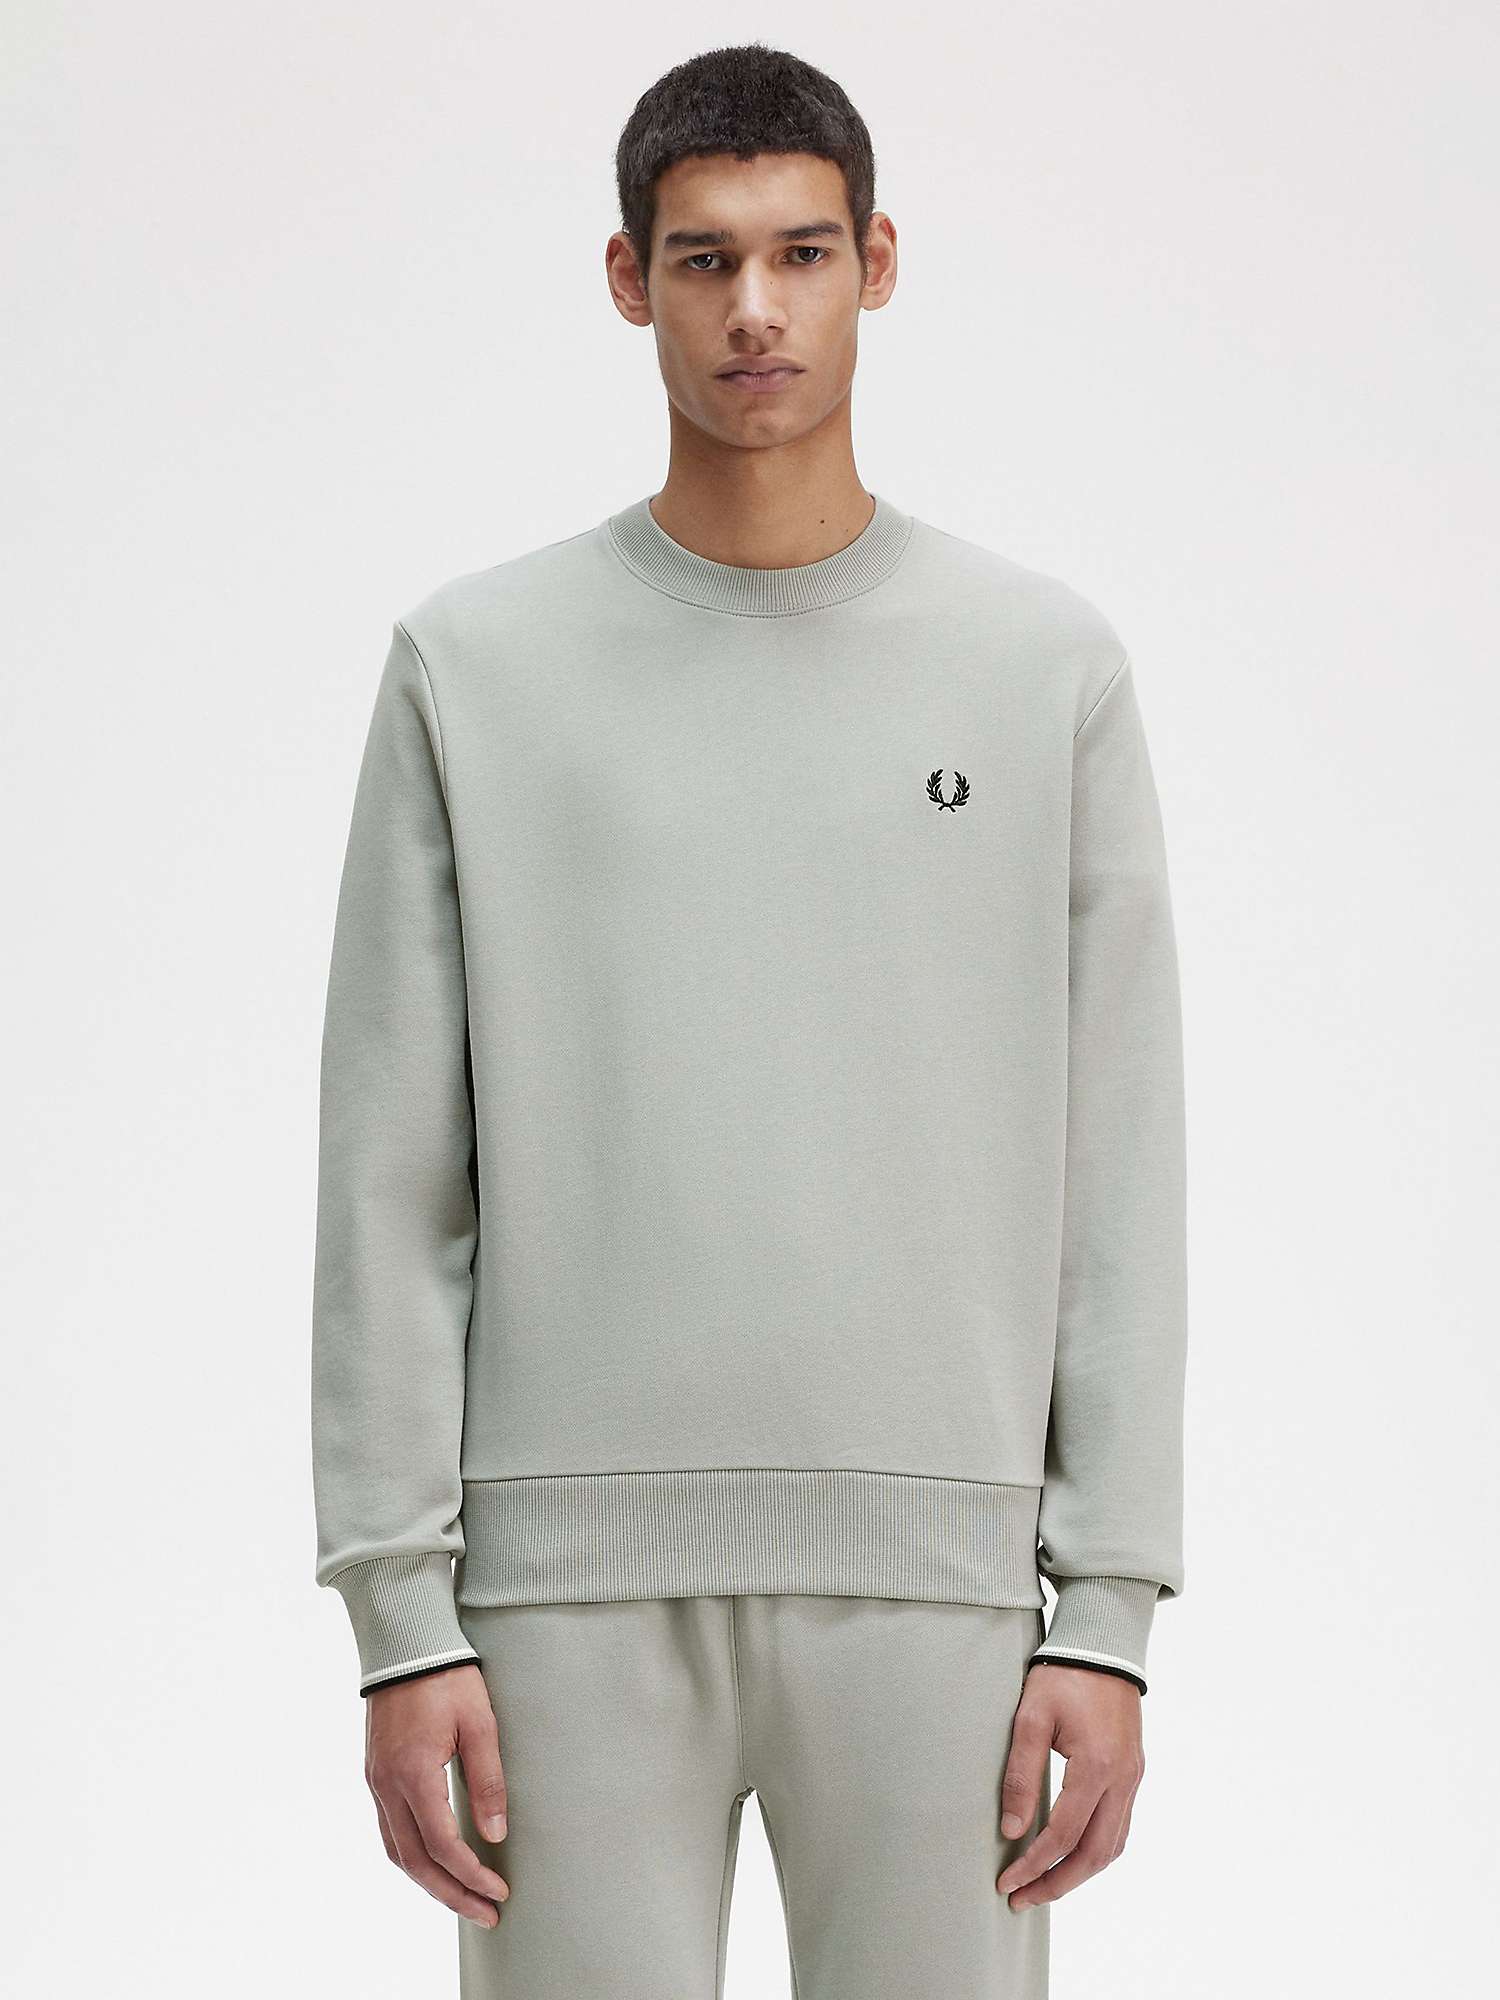 Buy Fred Perry Crew Neck Jumper, Limestone Online at johnlewis.com